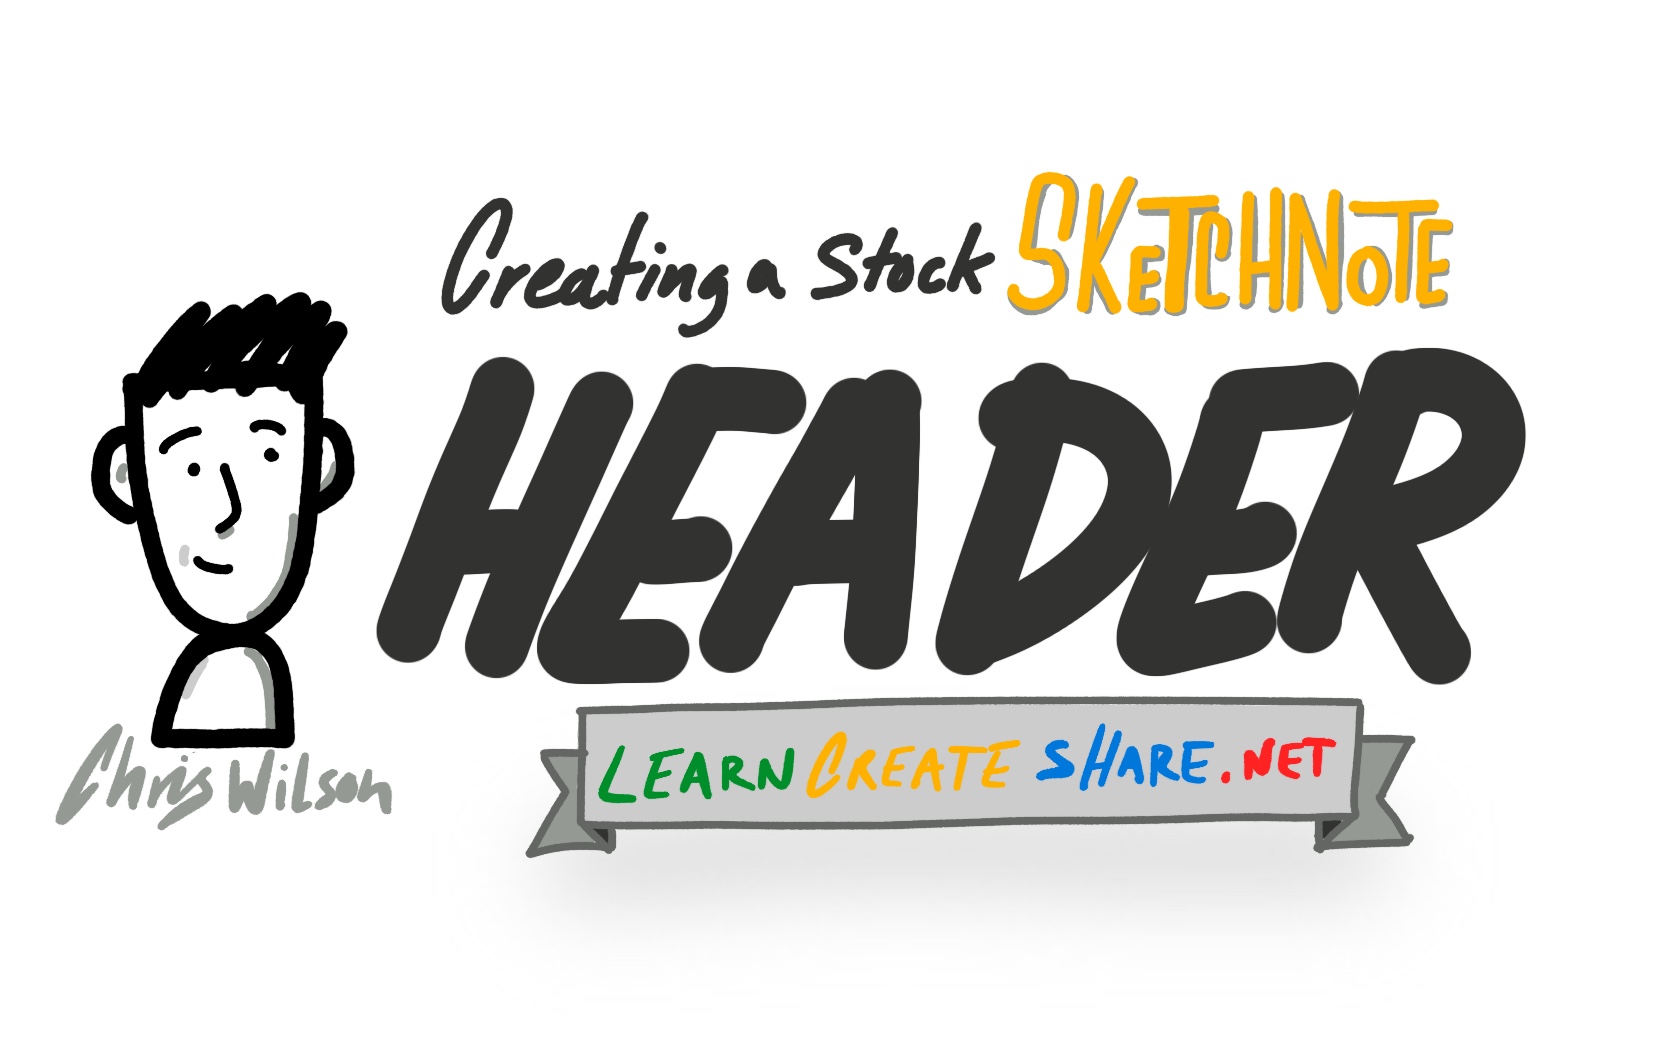 Creating and using a stock sketchnote header template